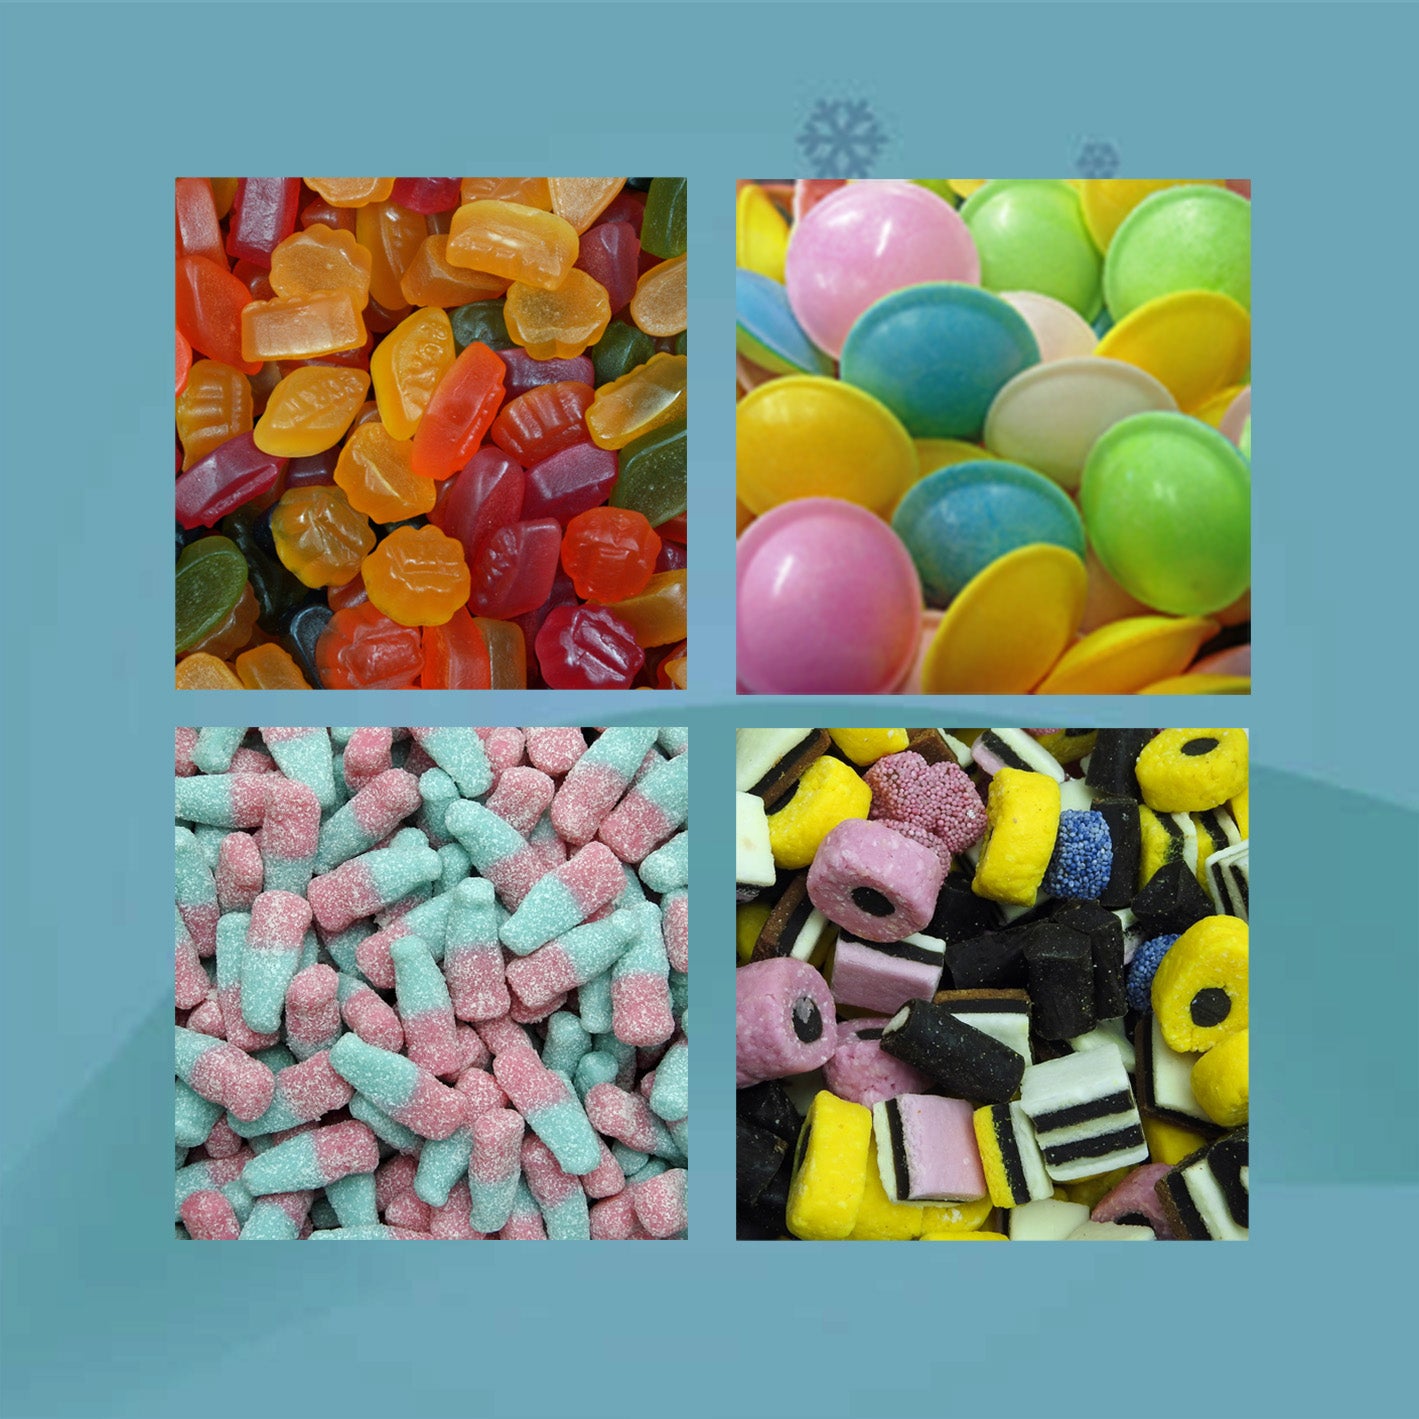 Choose from traditional old fashioned sweets to retro 70s and 80s sweets - we've got all your old UK favourites!